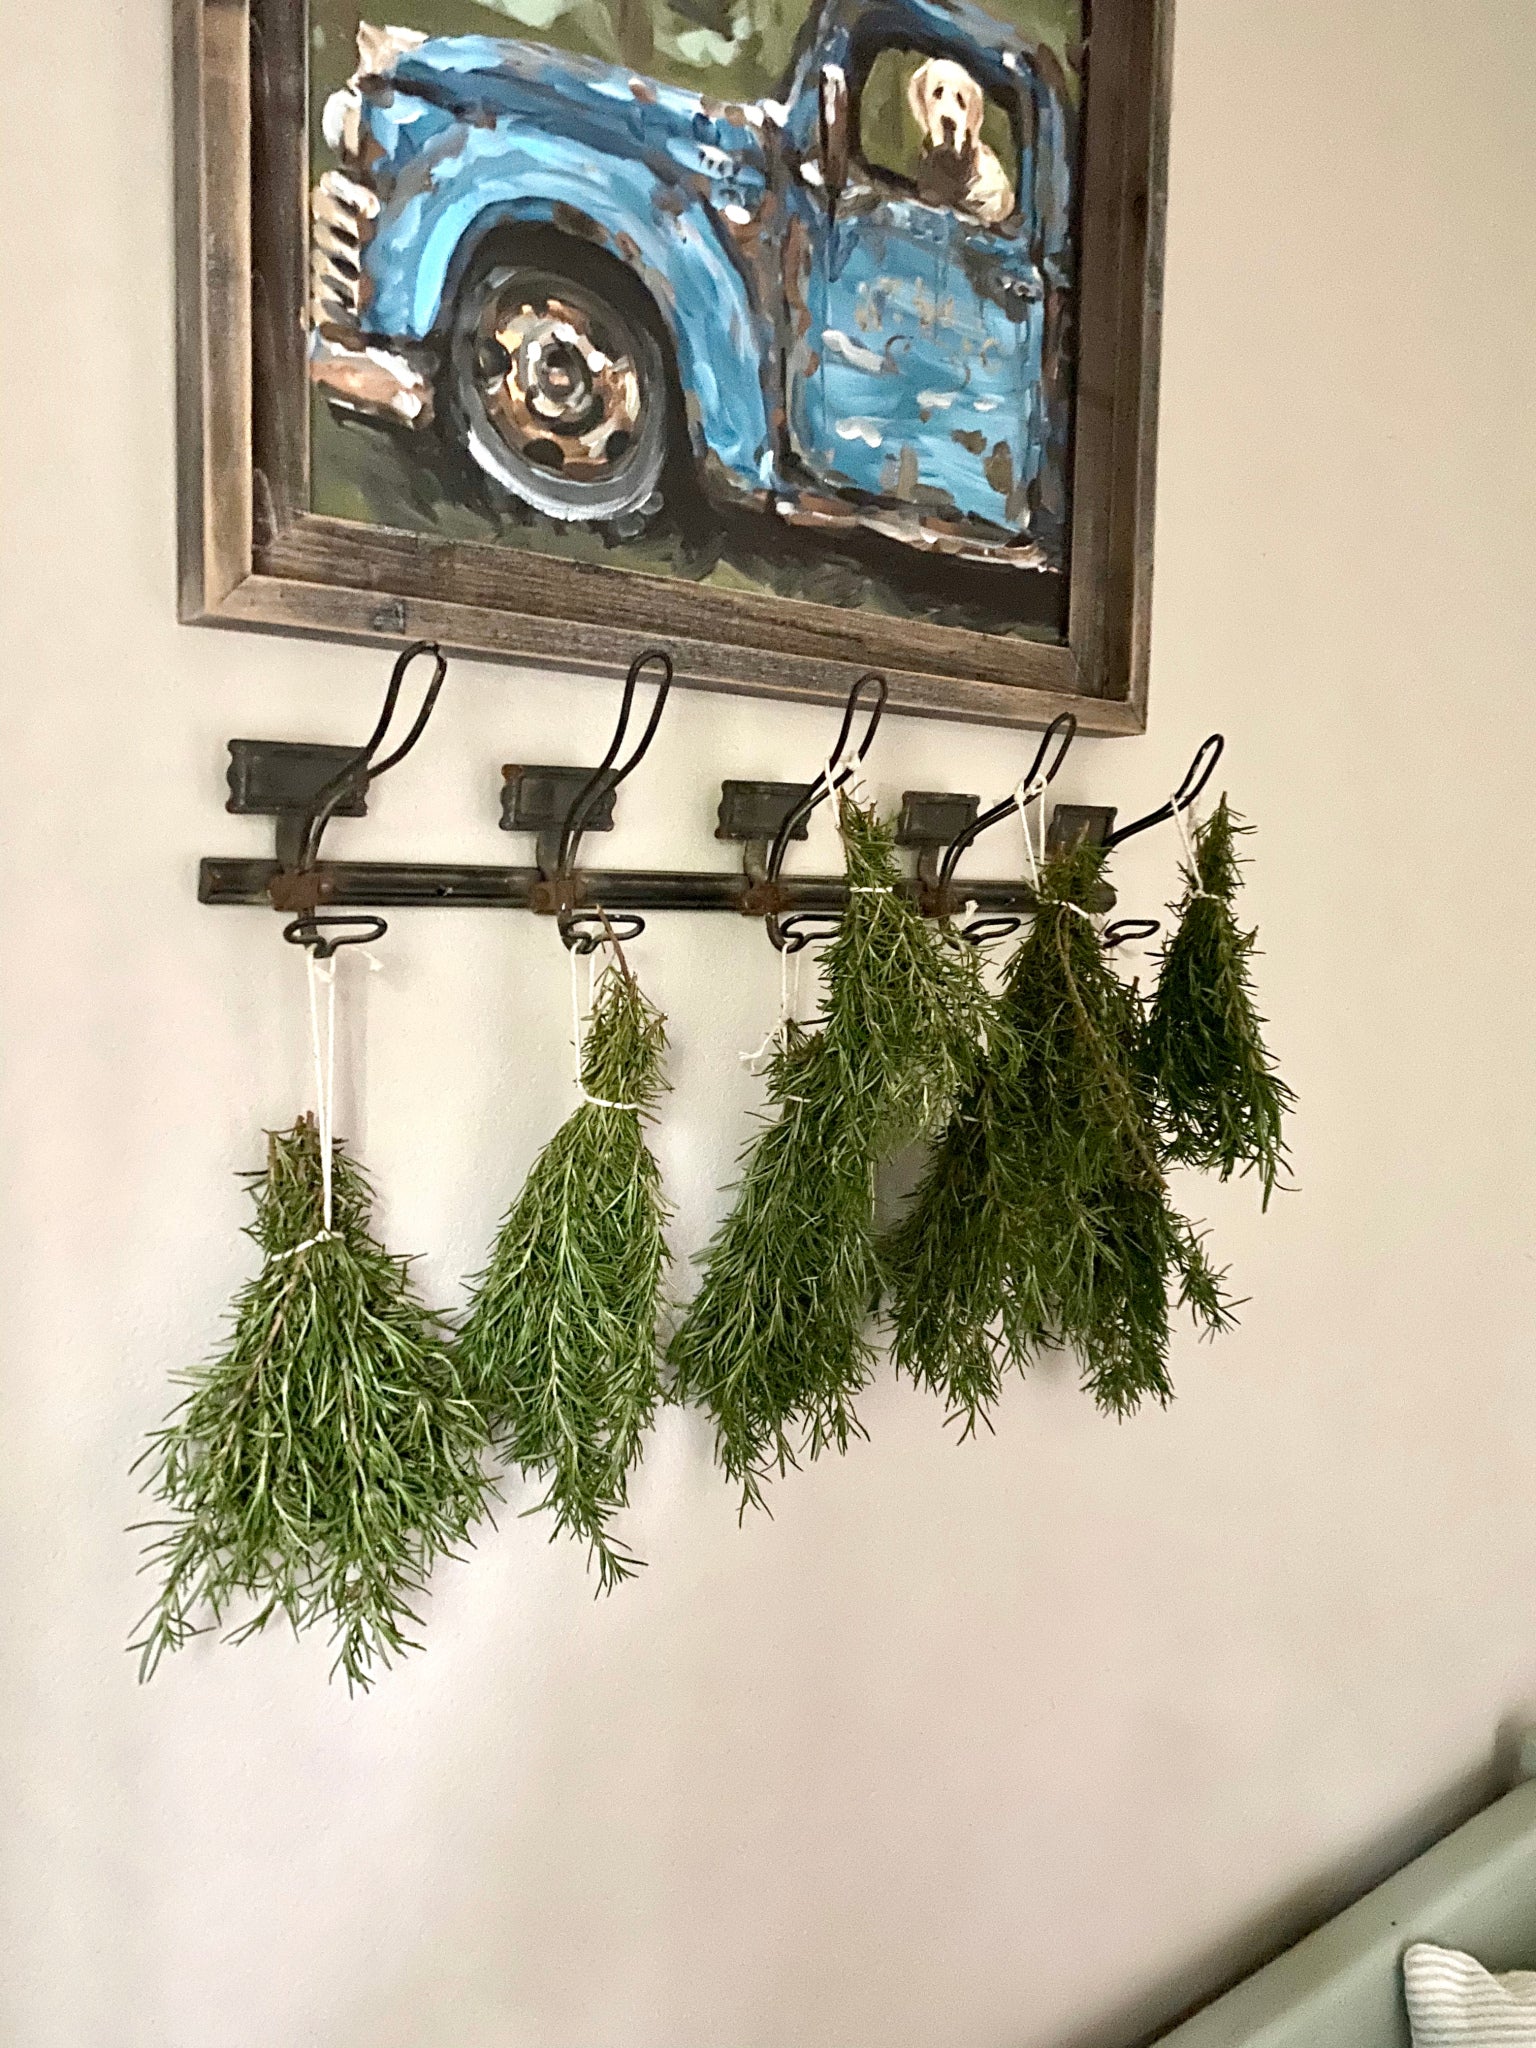 Growing and Drying Your Own Herbs